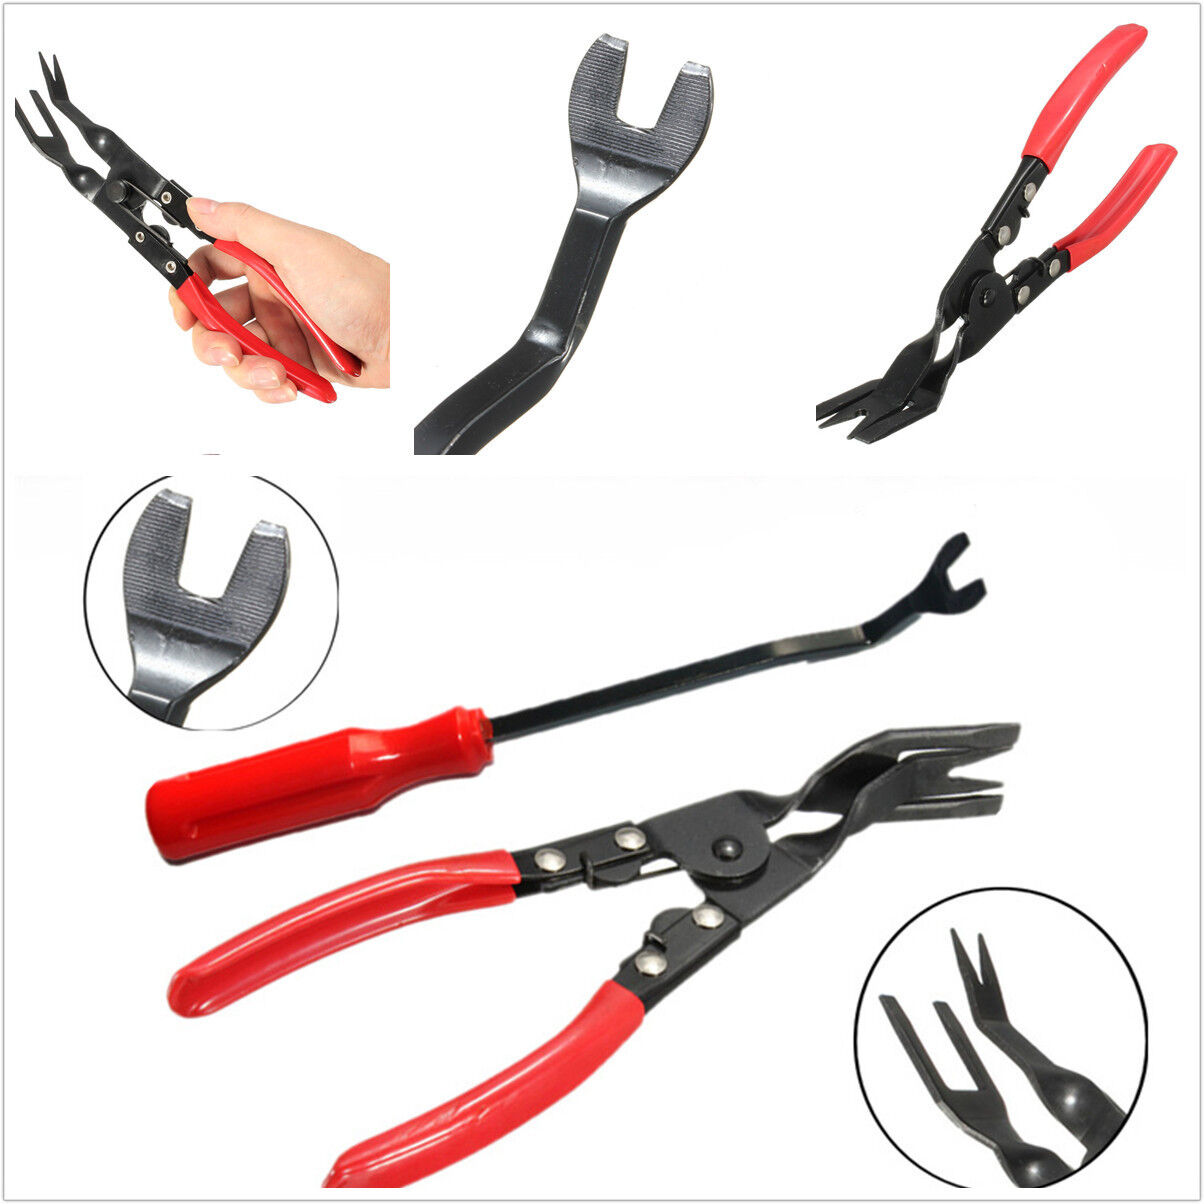 2in1 Universal Car SUV Door Card Panel Trim Clip Removal Handle Tool Pry Kits 